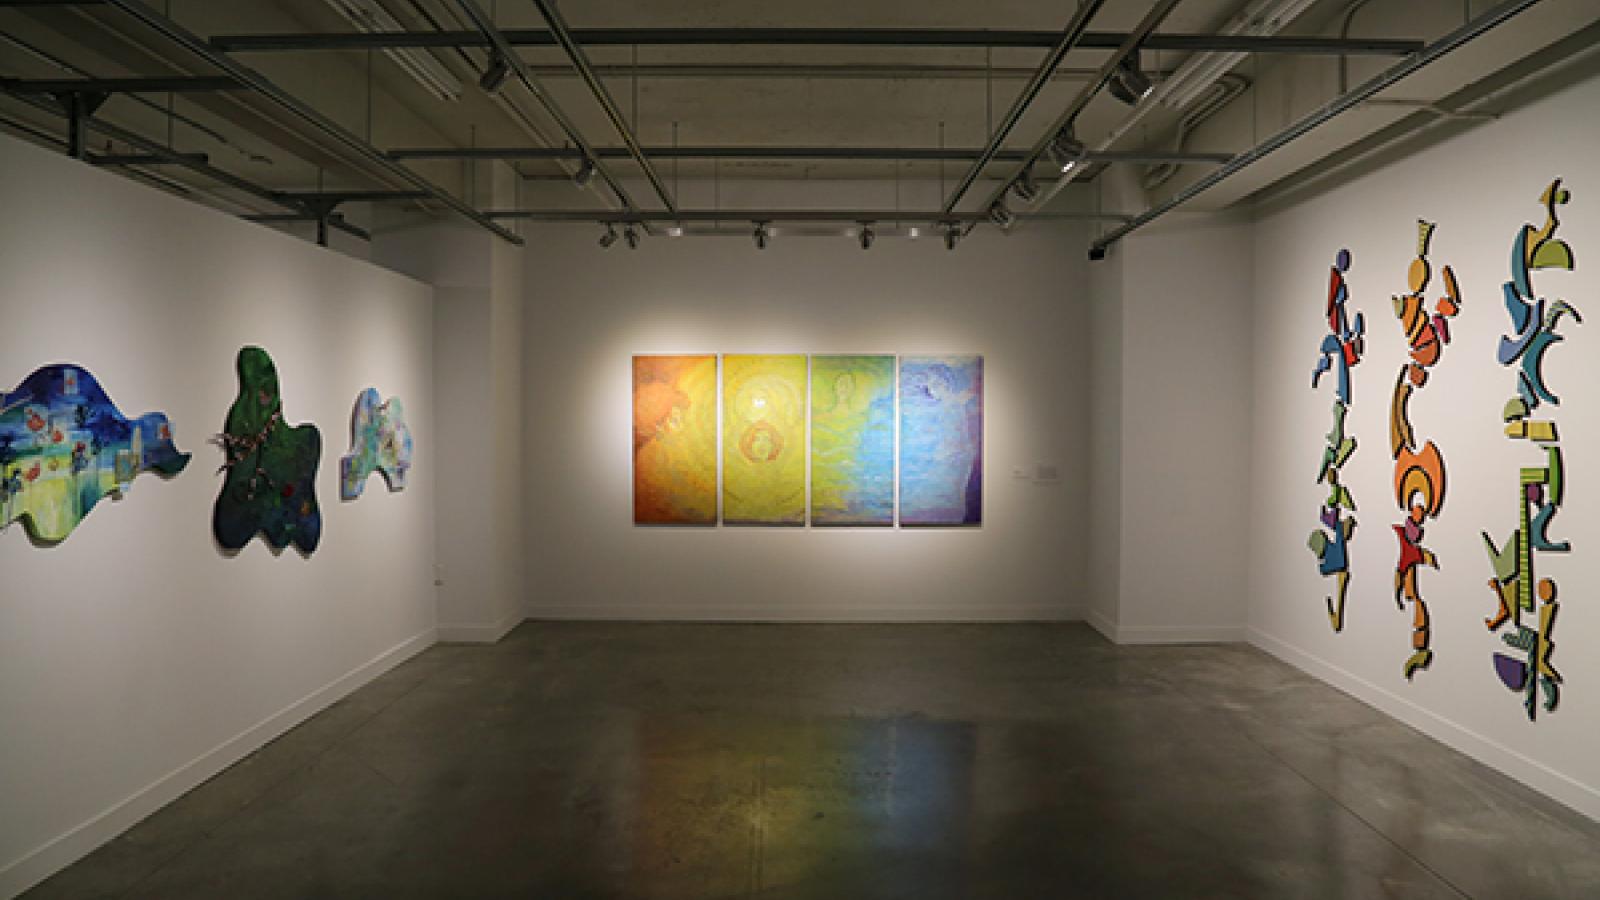 Gallery view of "Remnants"